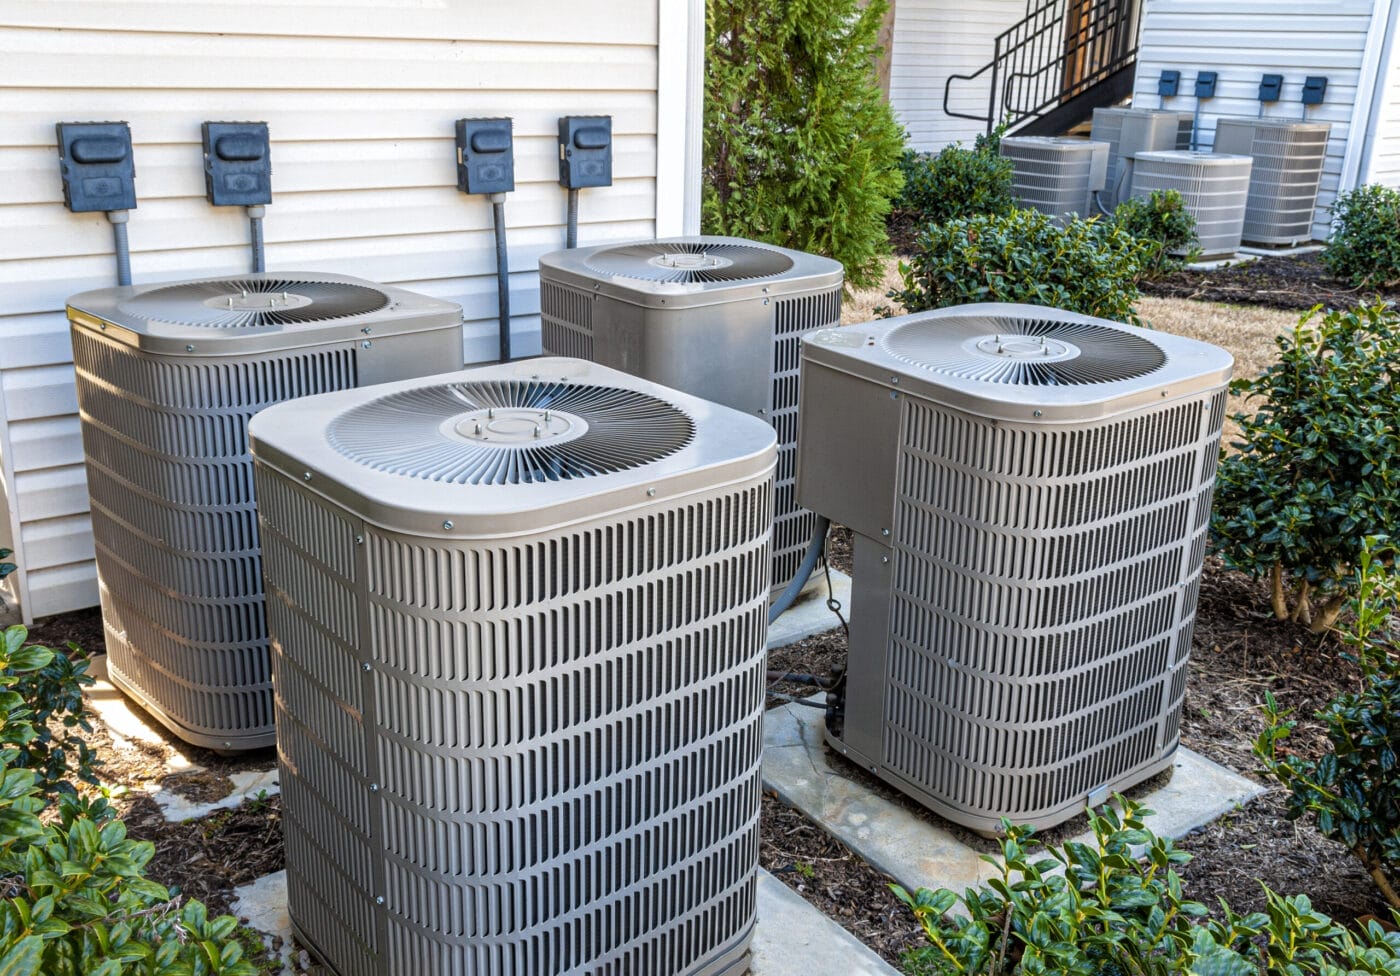 HVAC Units Connected to Apartments in Barnwell AL